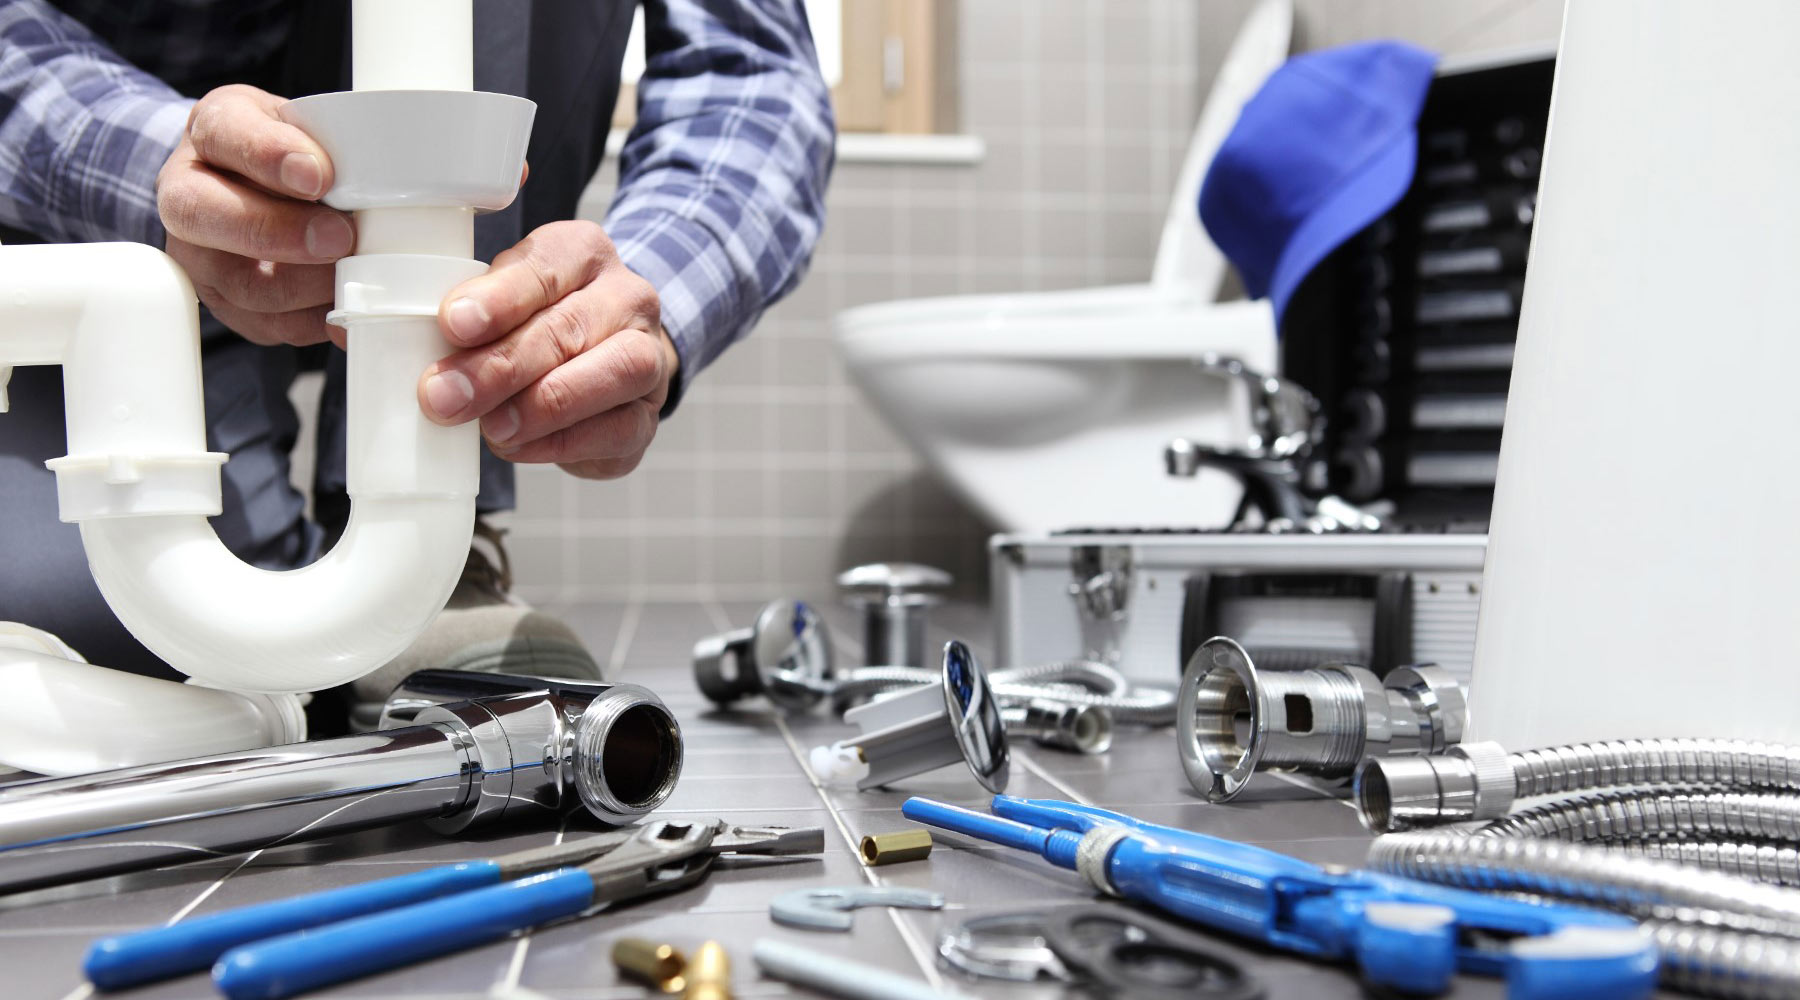 Plumber Irving TX | Texas Blessed Plumbing - Call Us Today!